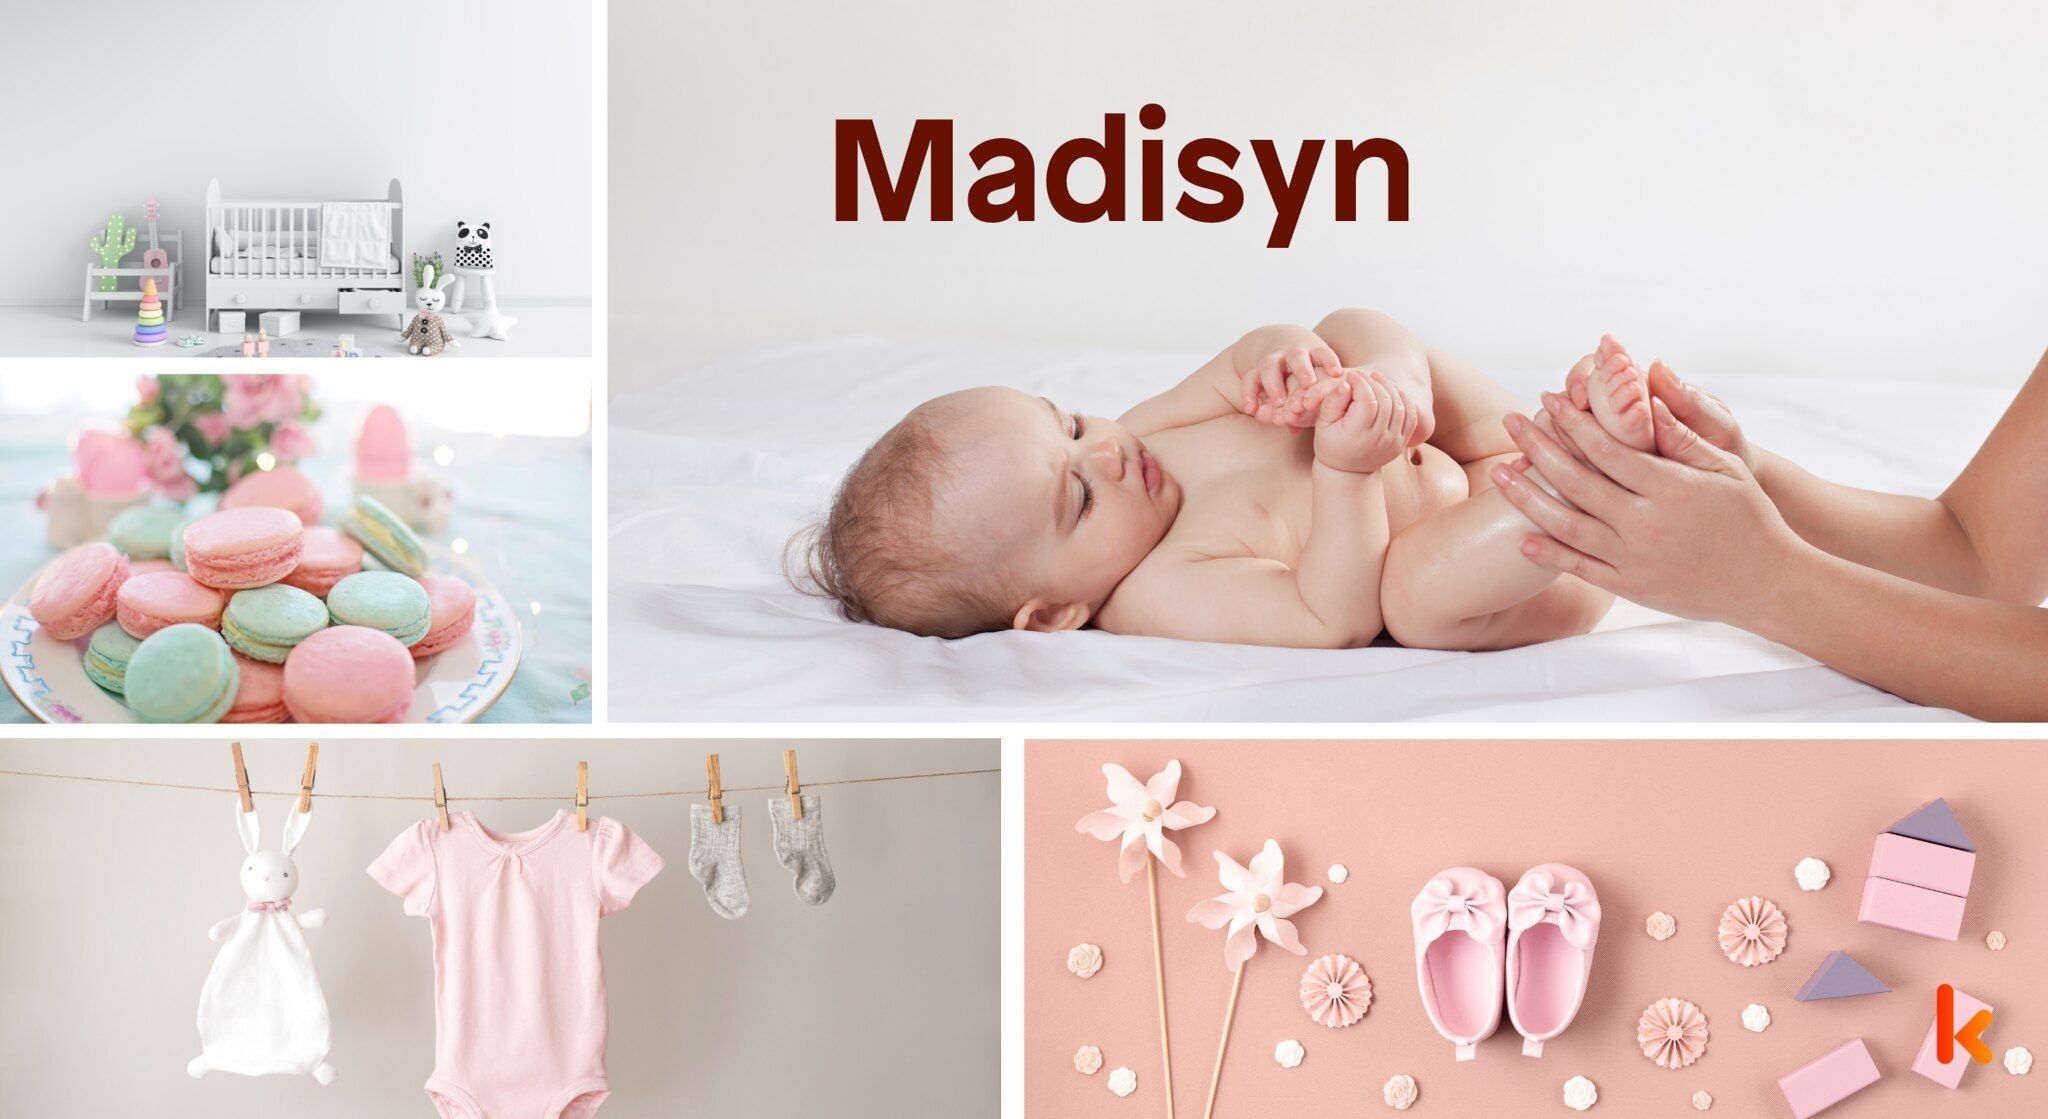 Meaning of the name Madisyn